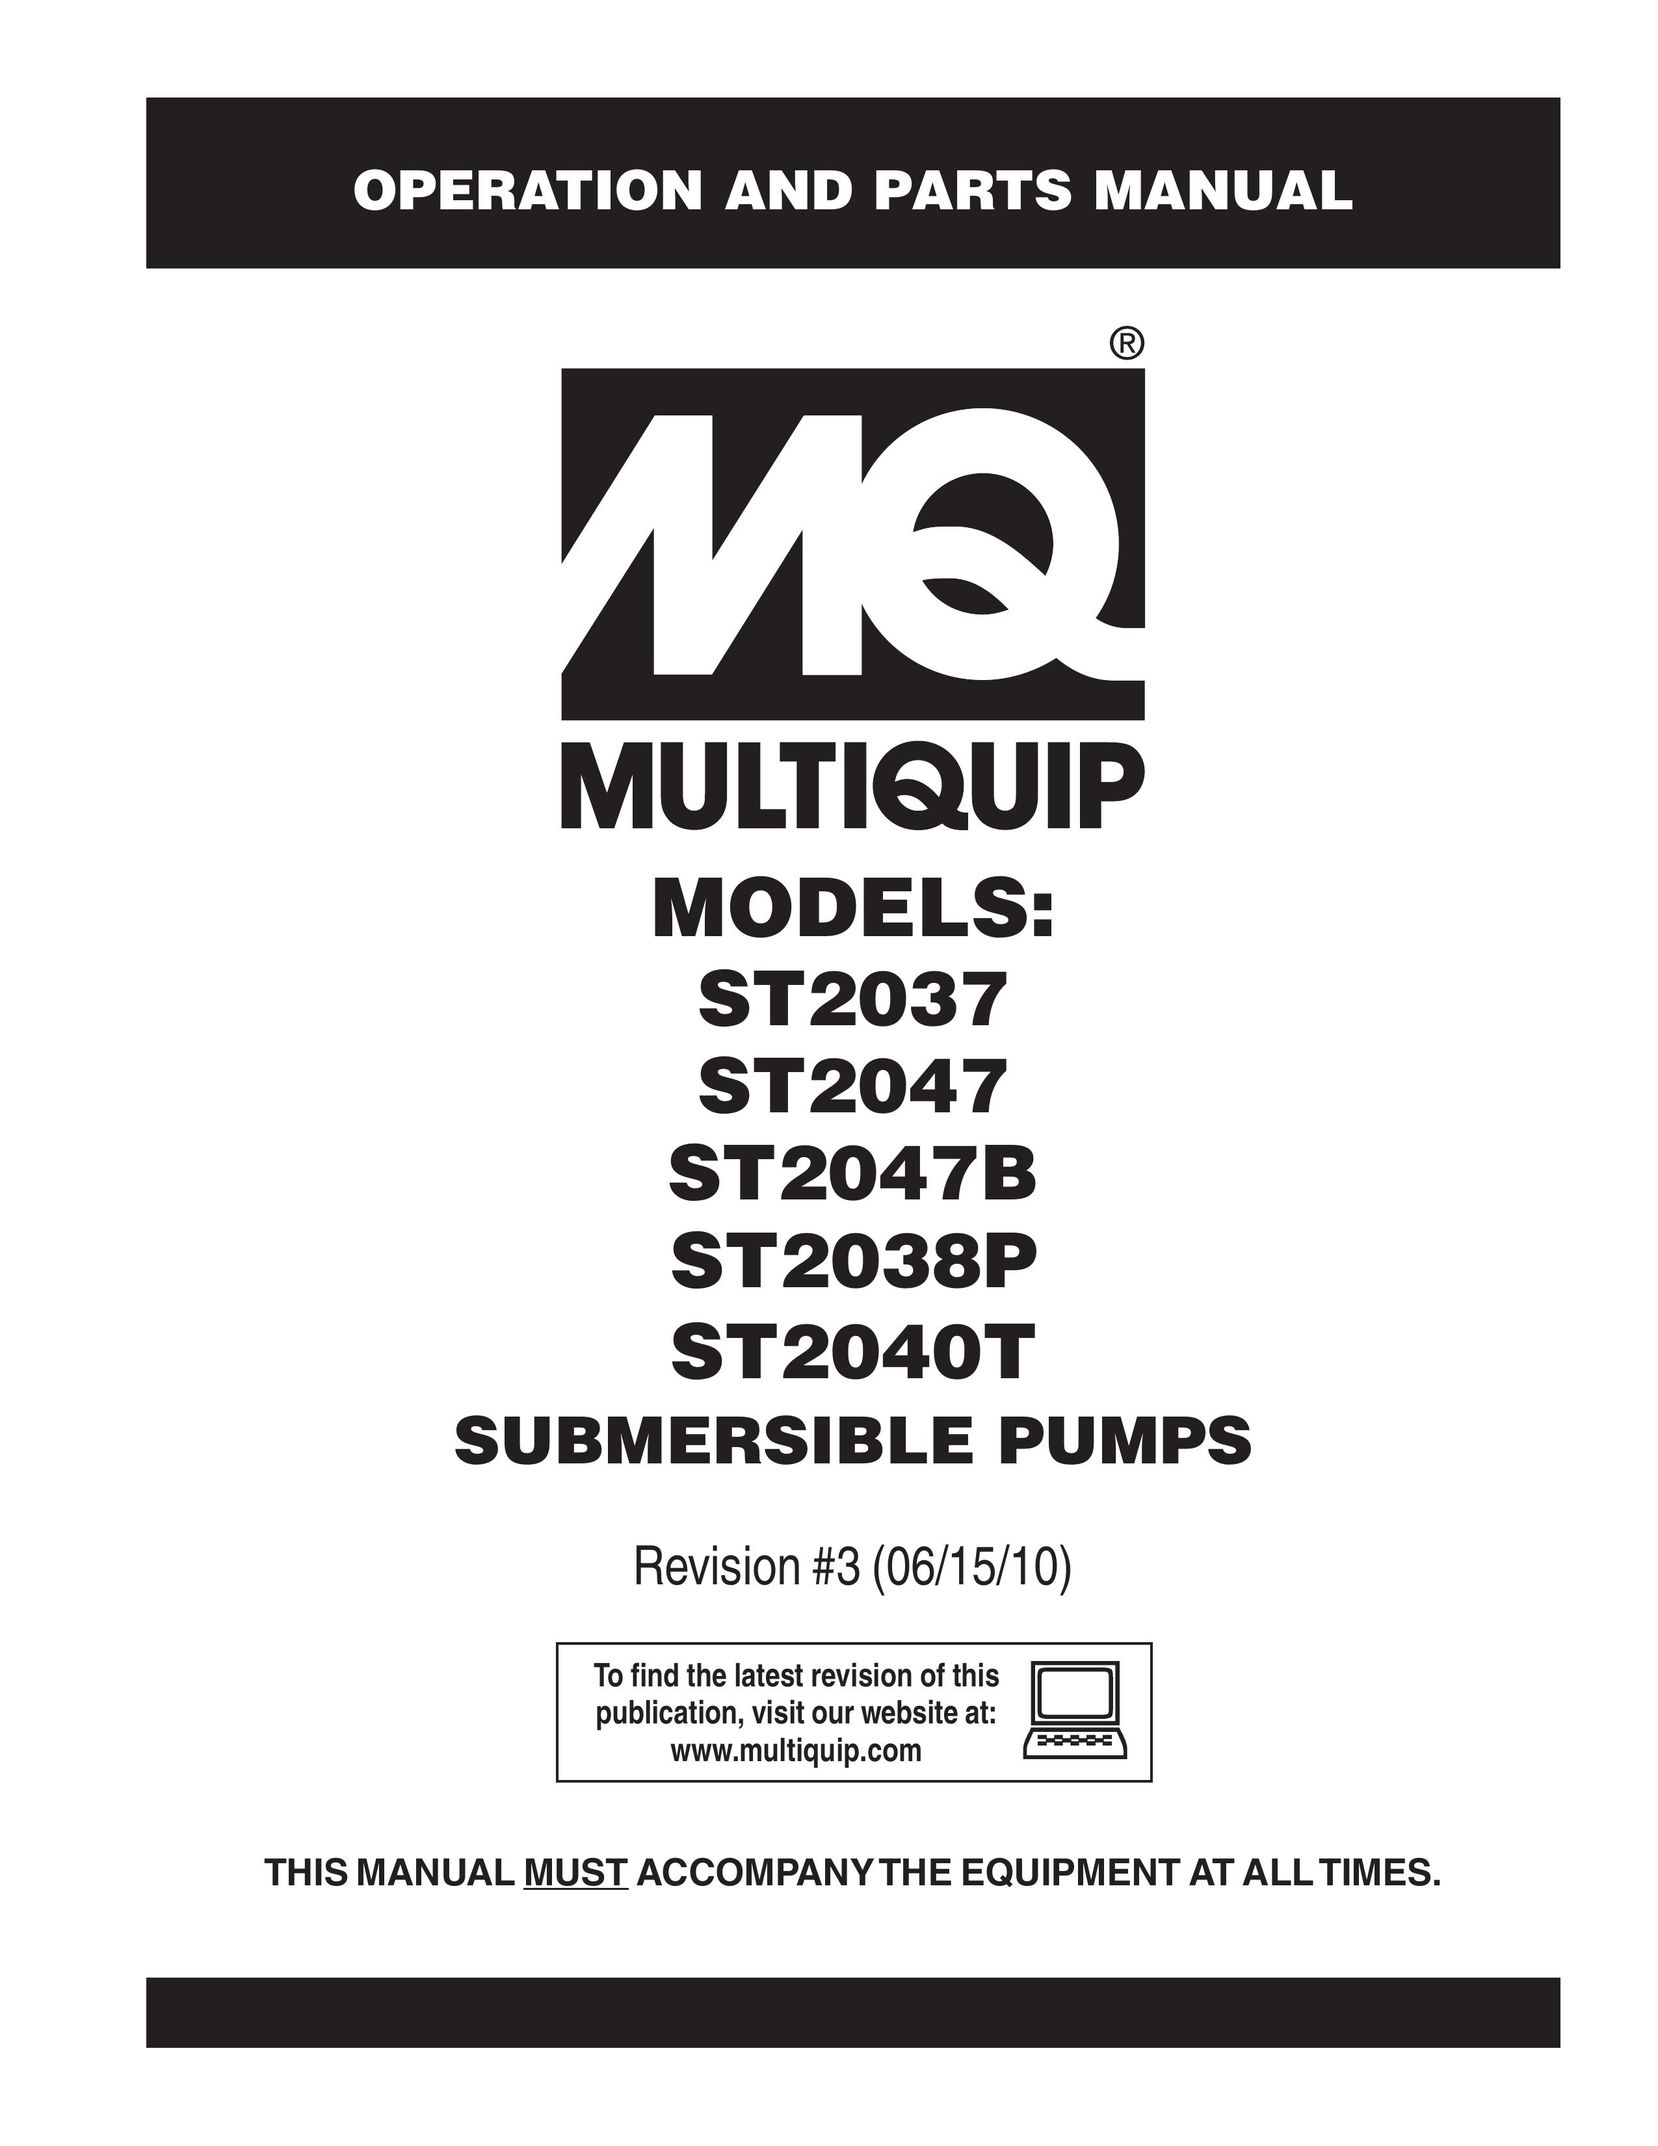 Multiquip ST2047 Septic System User Manual